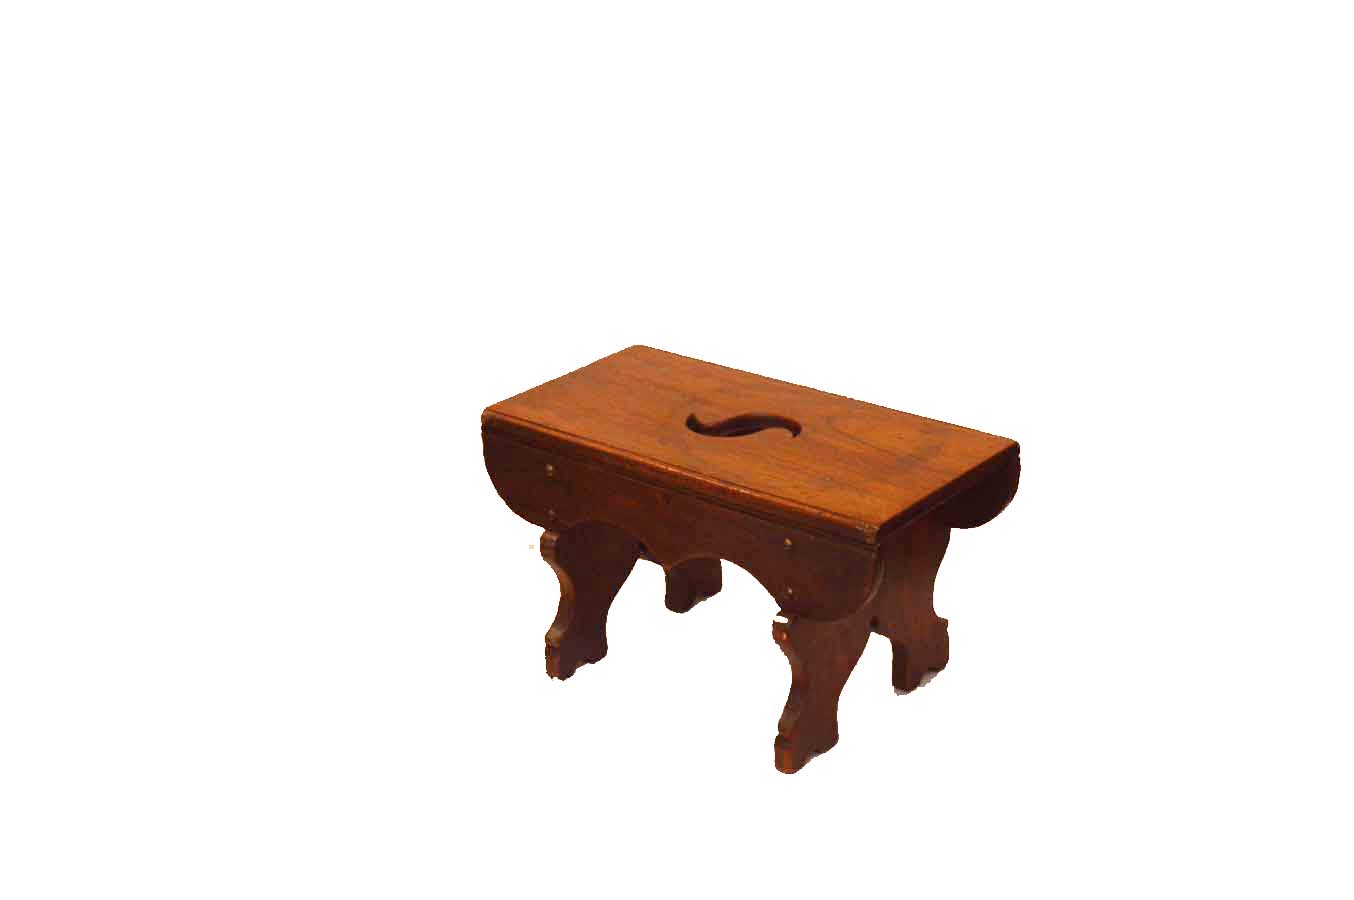 A Small Wooden Footstool